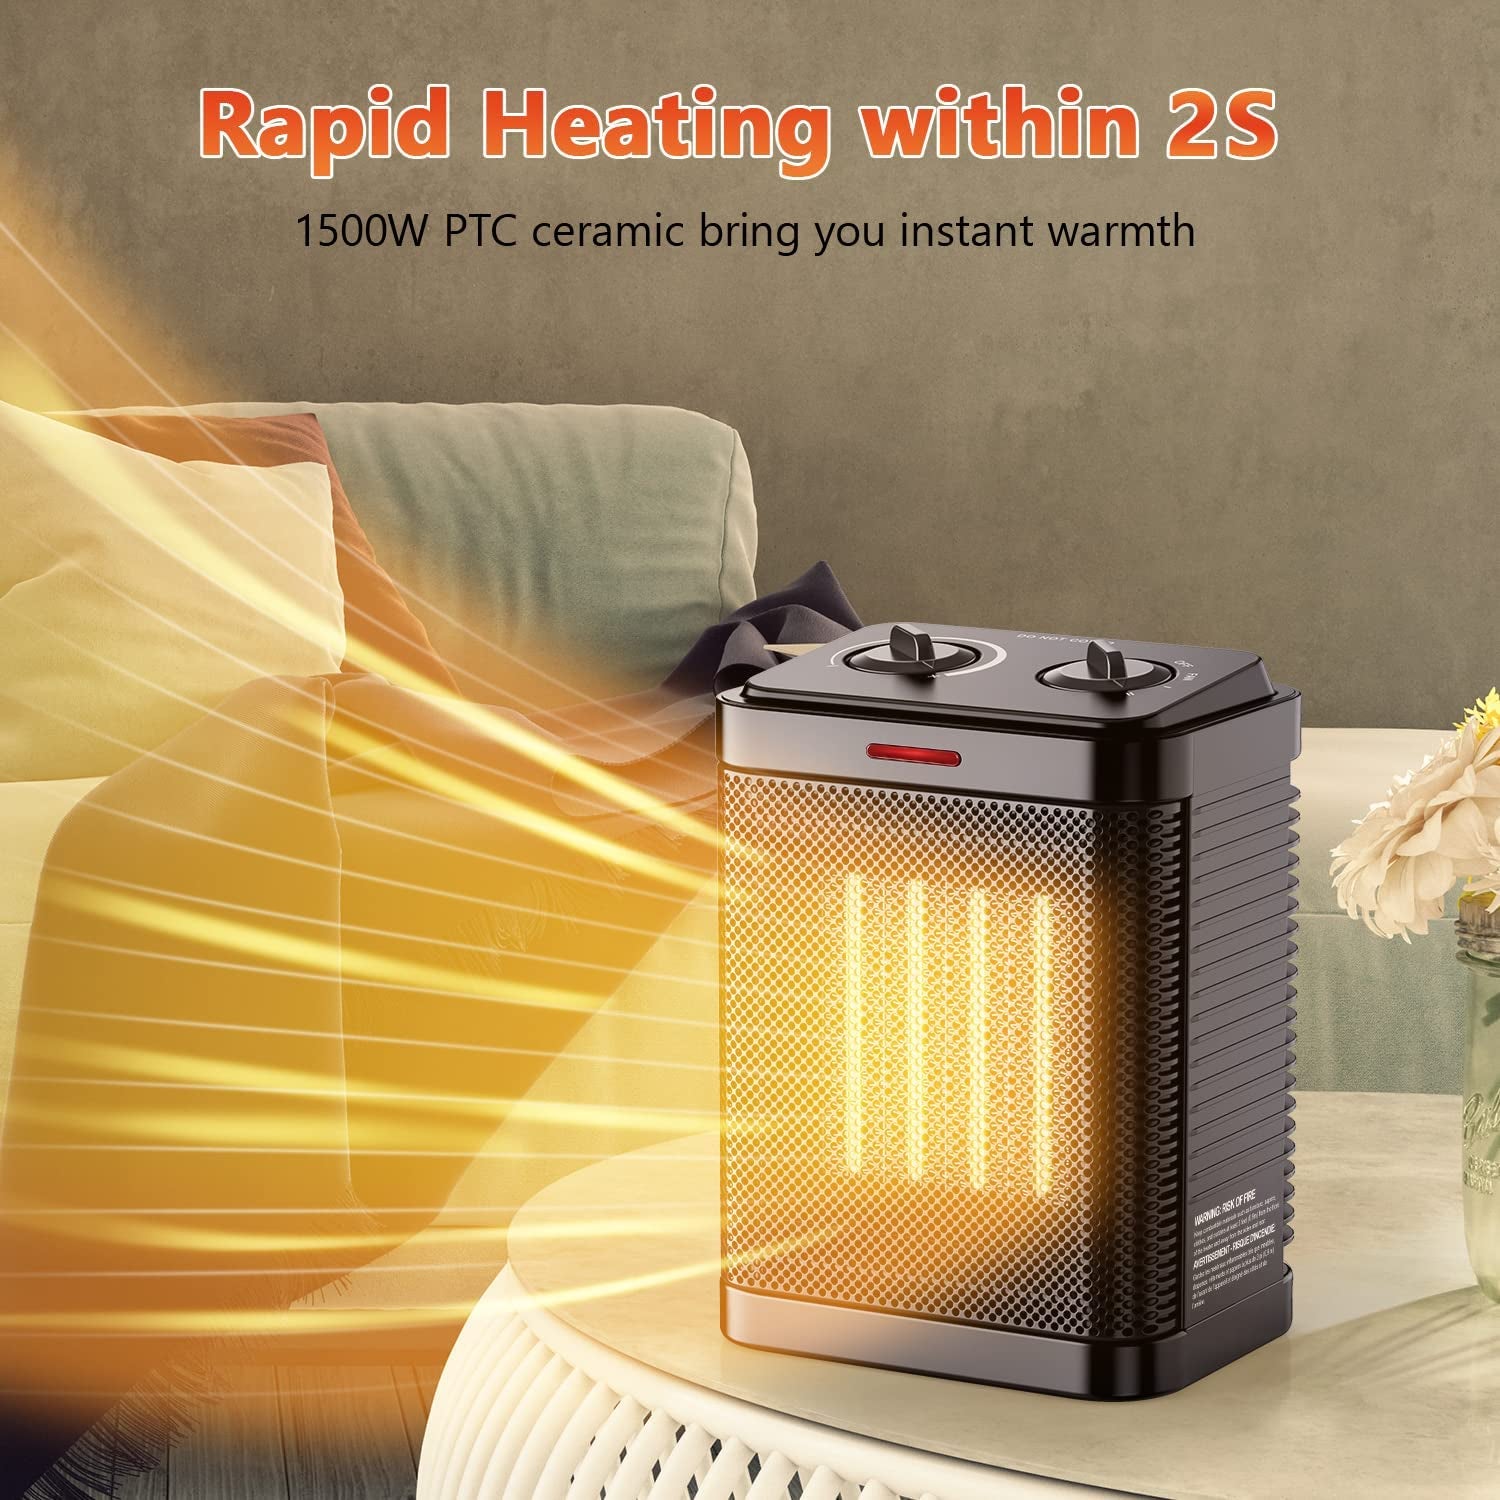 1500W Space Heater for Indoor Use, Portable Electric Heater 2S Rapid Heating, Small Space Heater with Thermostat, PTC Ceramic Heater with Tip-Over and Overheat Protection, Great for Home and Office